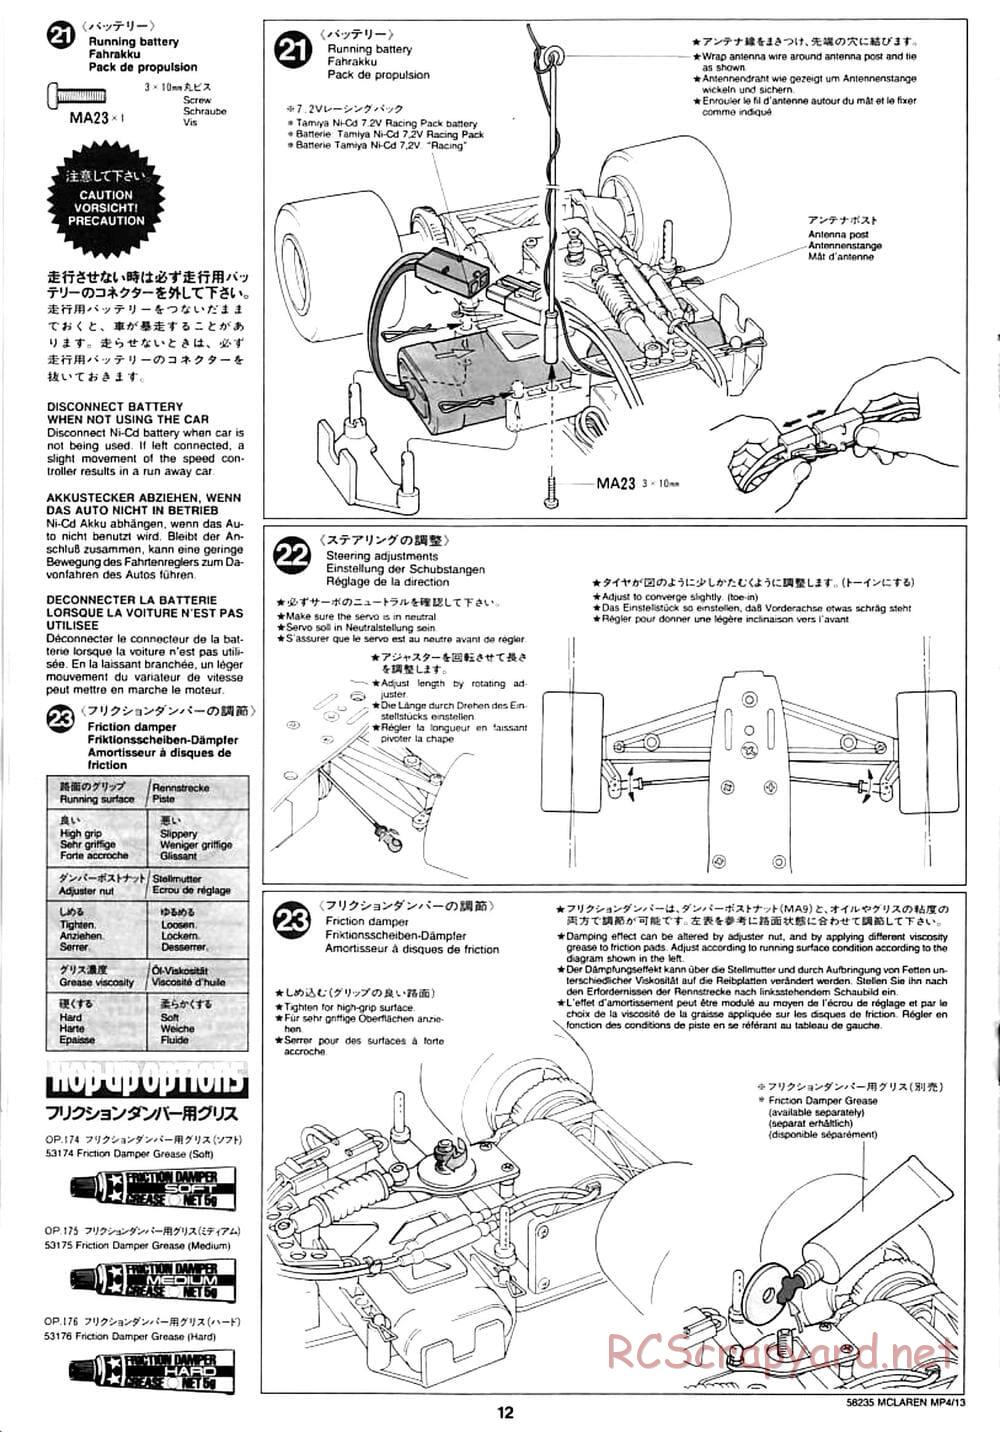 Tamiya - McLaren Mercedes MP4/13 - F103RS Chassis - Manual - Page 12